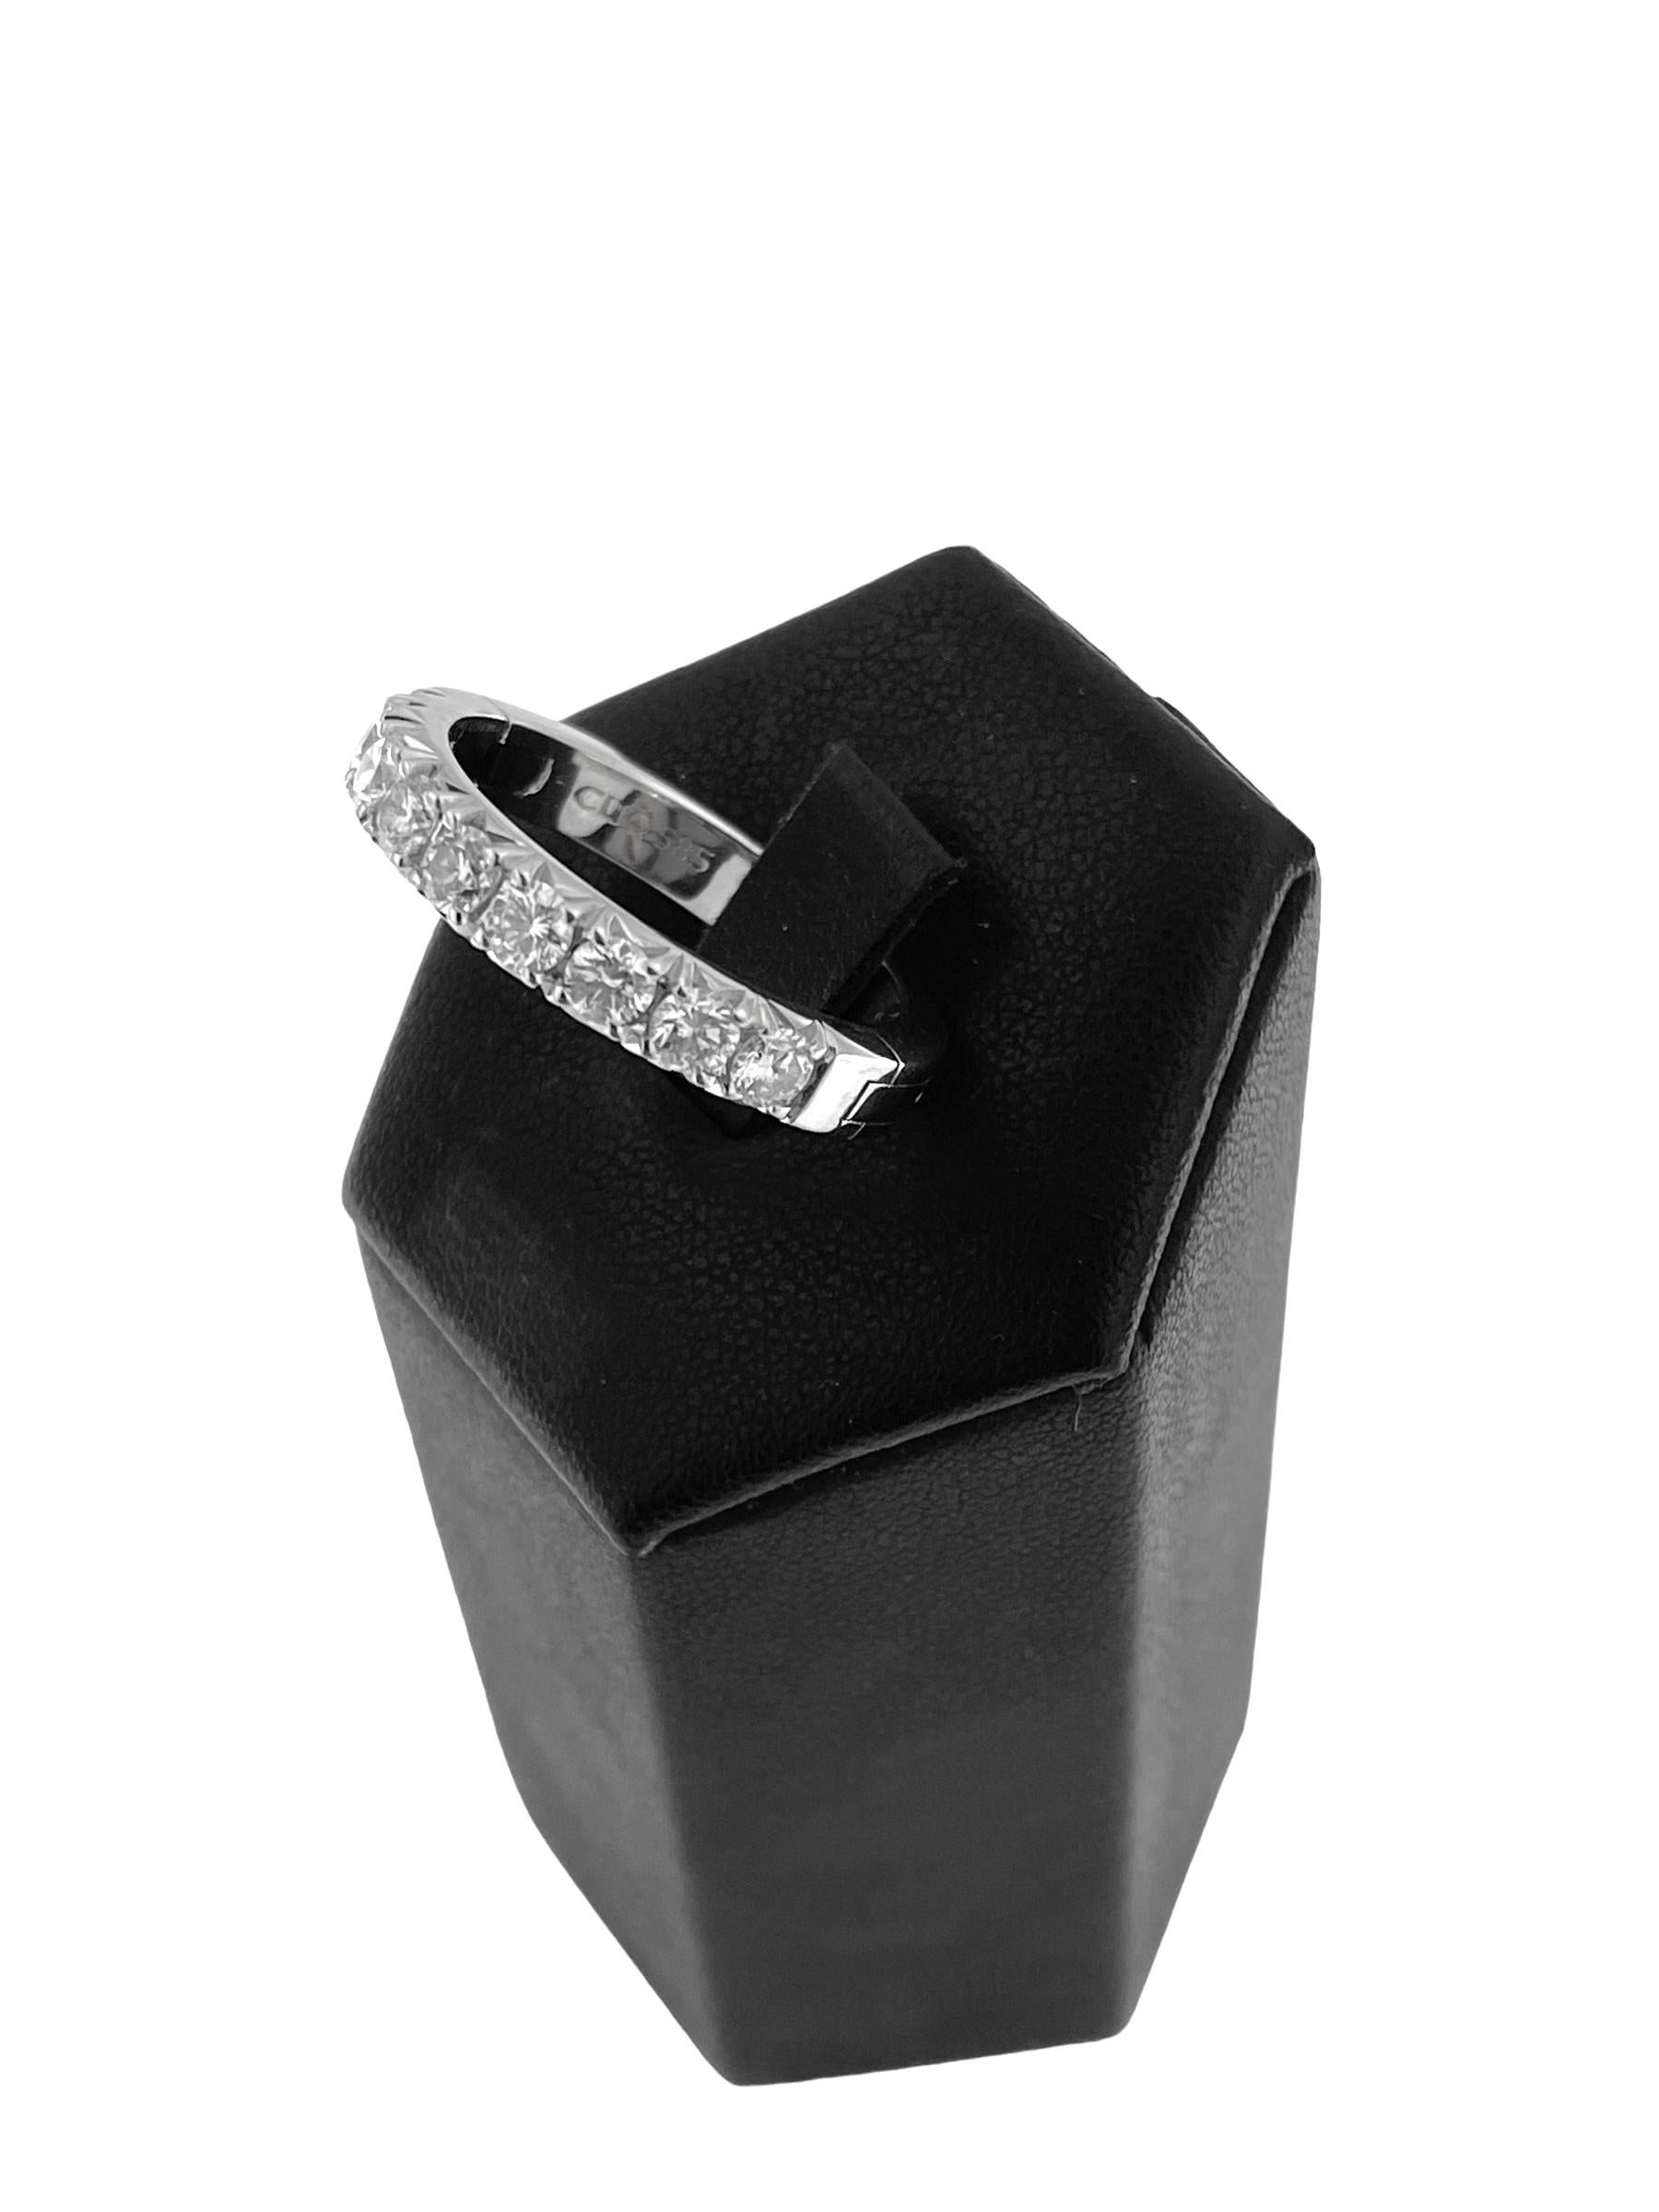 Women's or Men's HRD Certified White Gold Parisienne 1.00ct Diamonds Band Ring signed by Cliq For Sale